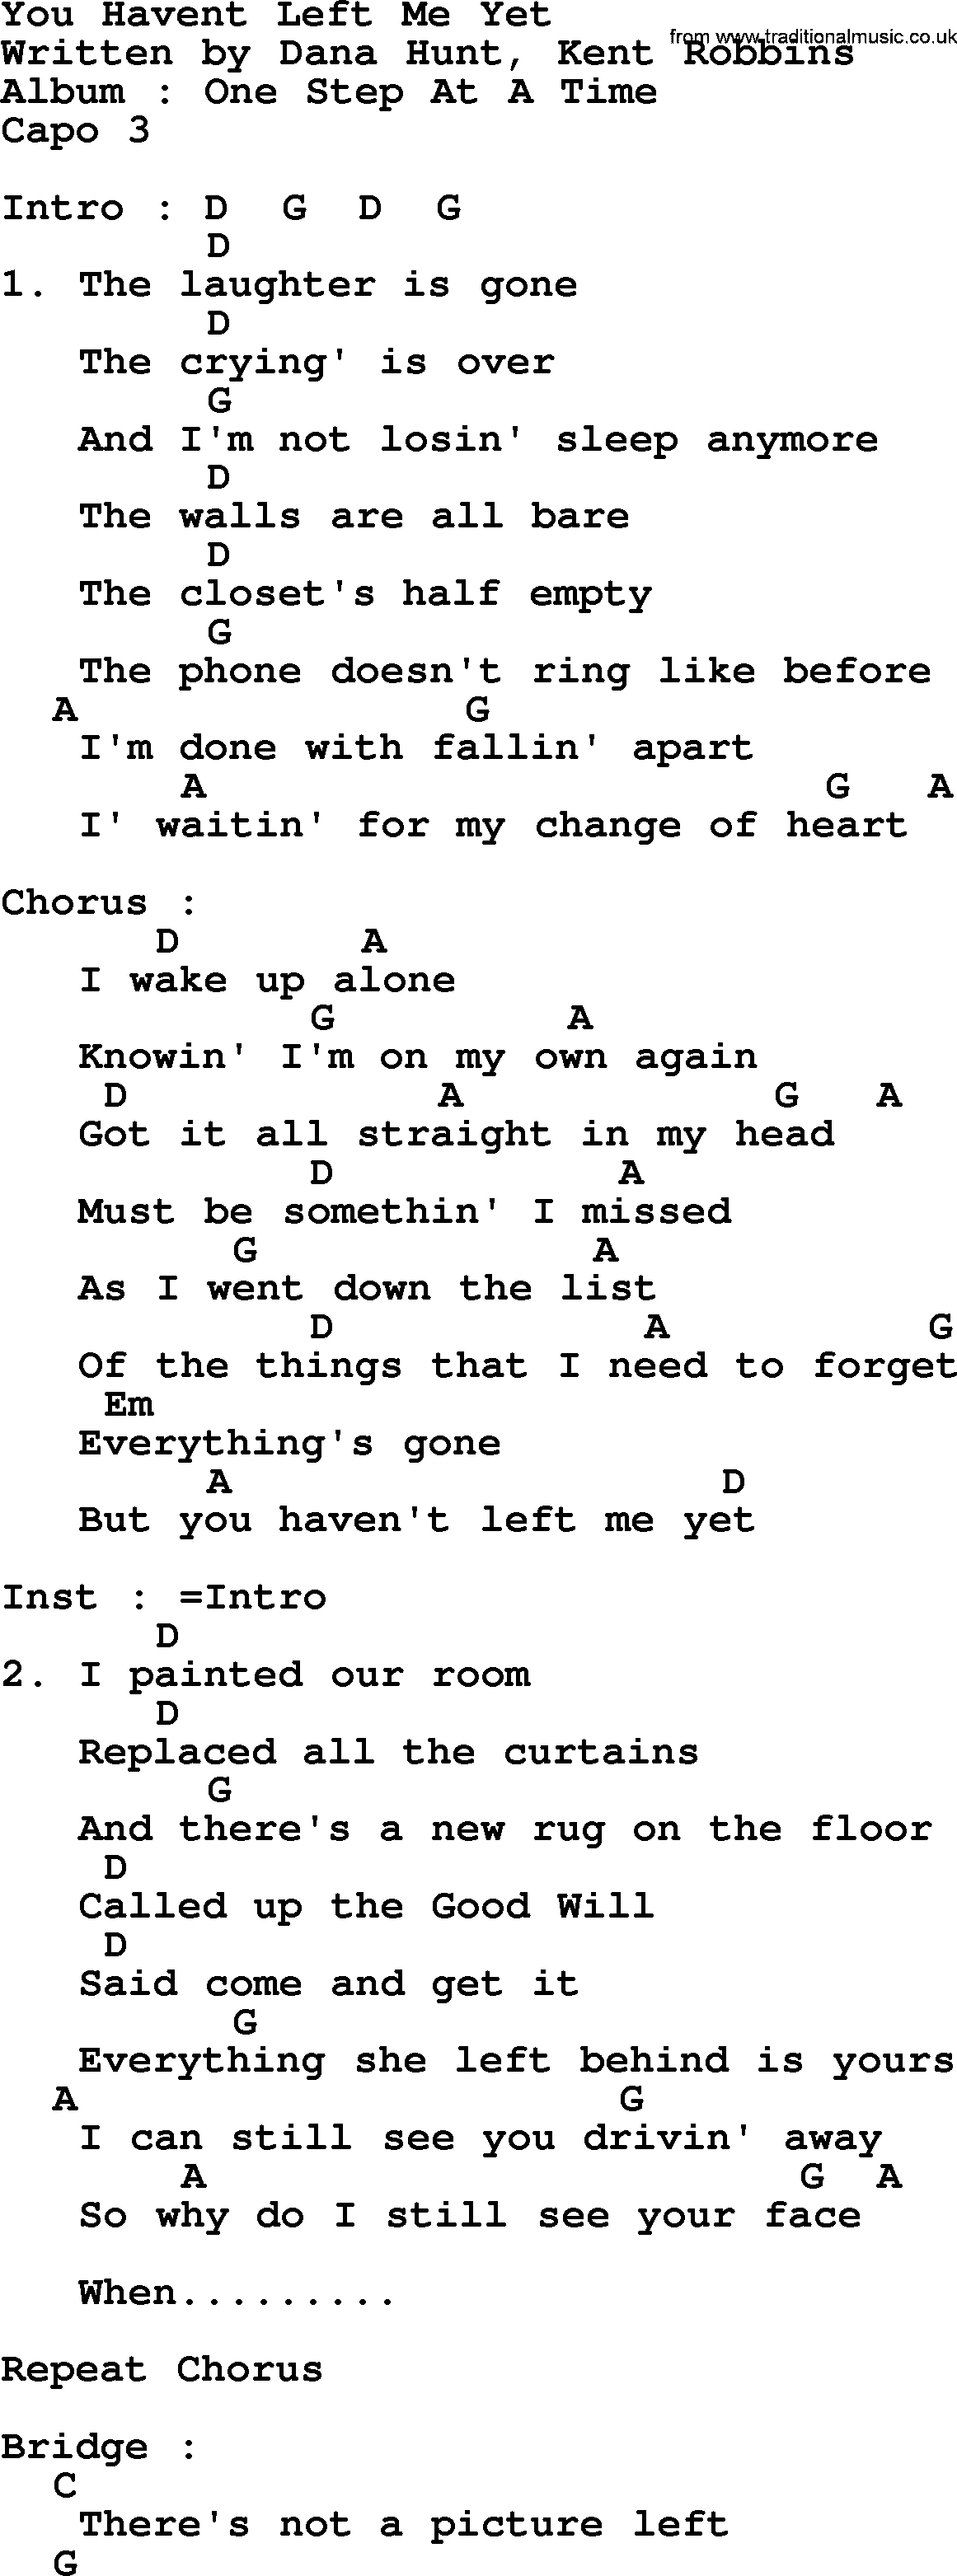 George Strait song: You Havent Left Me Yet, lyrics and chords